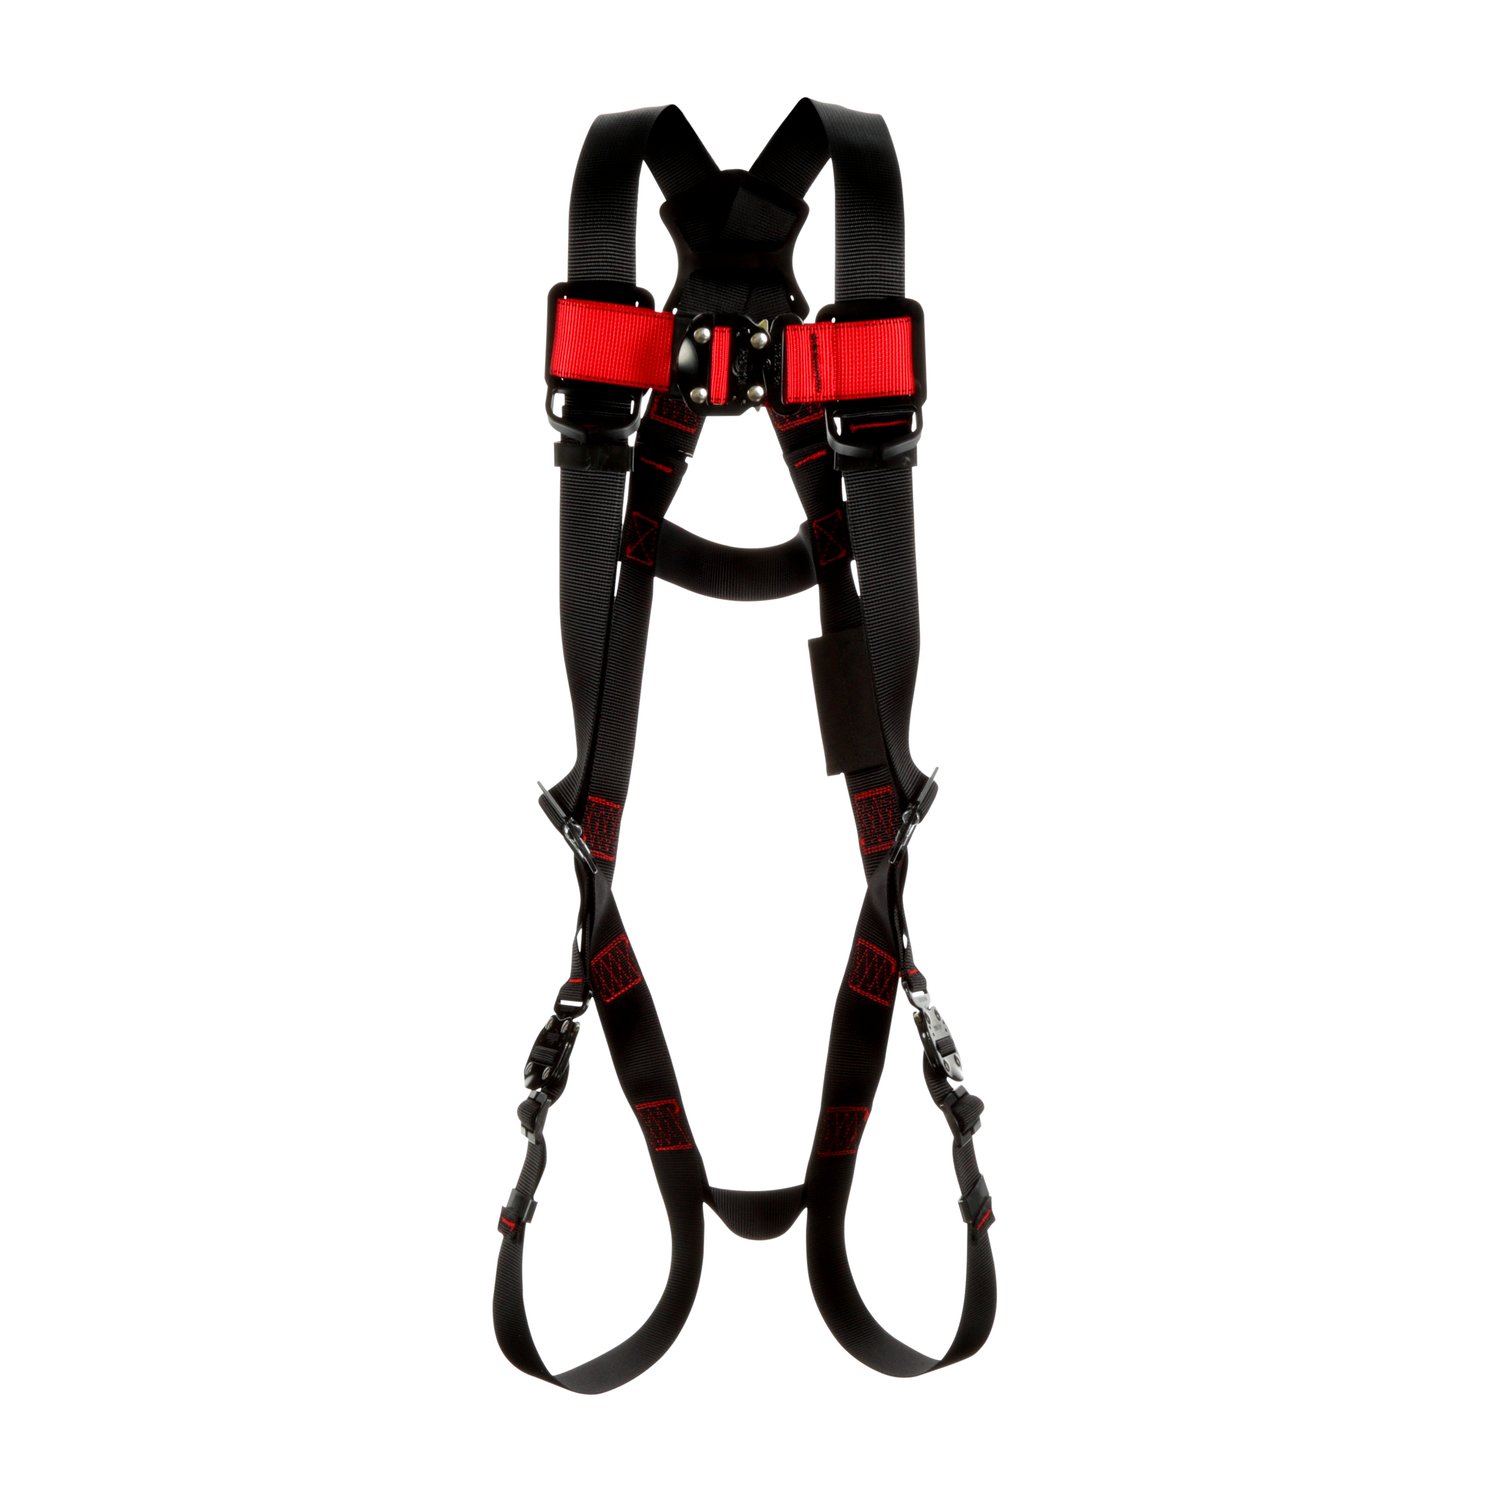 7012816777 - 3M Protecta P200 Vest Safety Harness 1161527, 2X